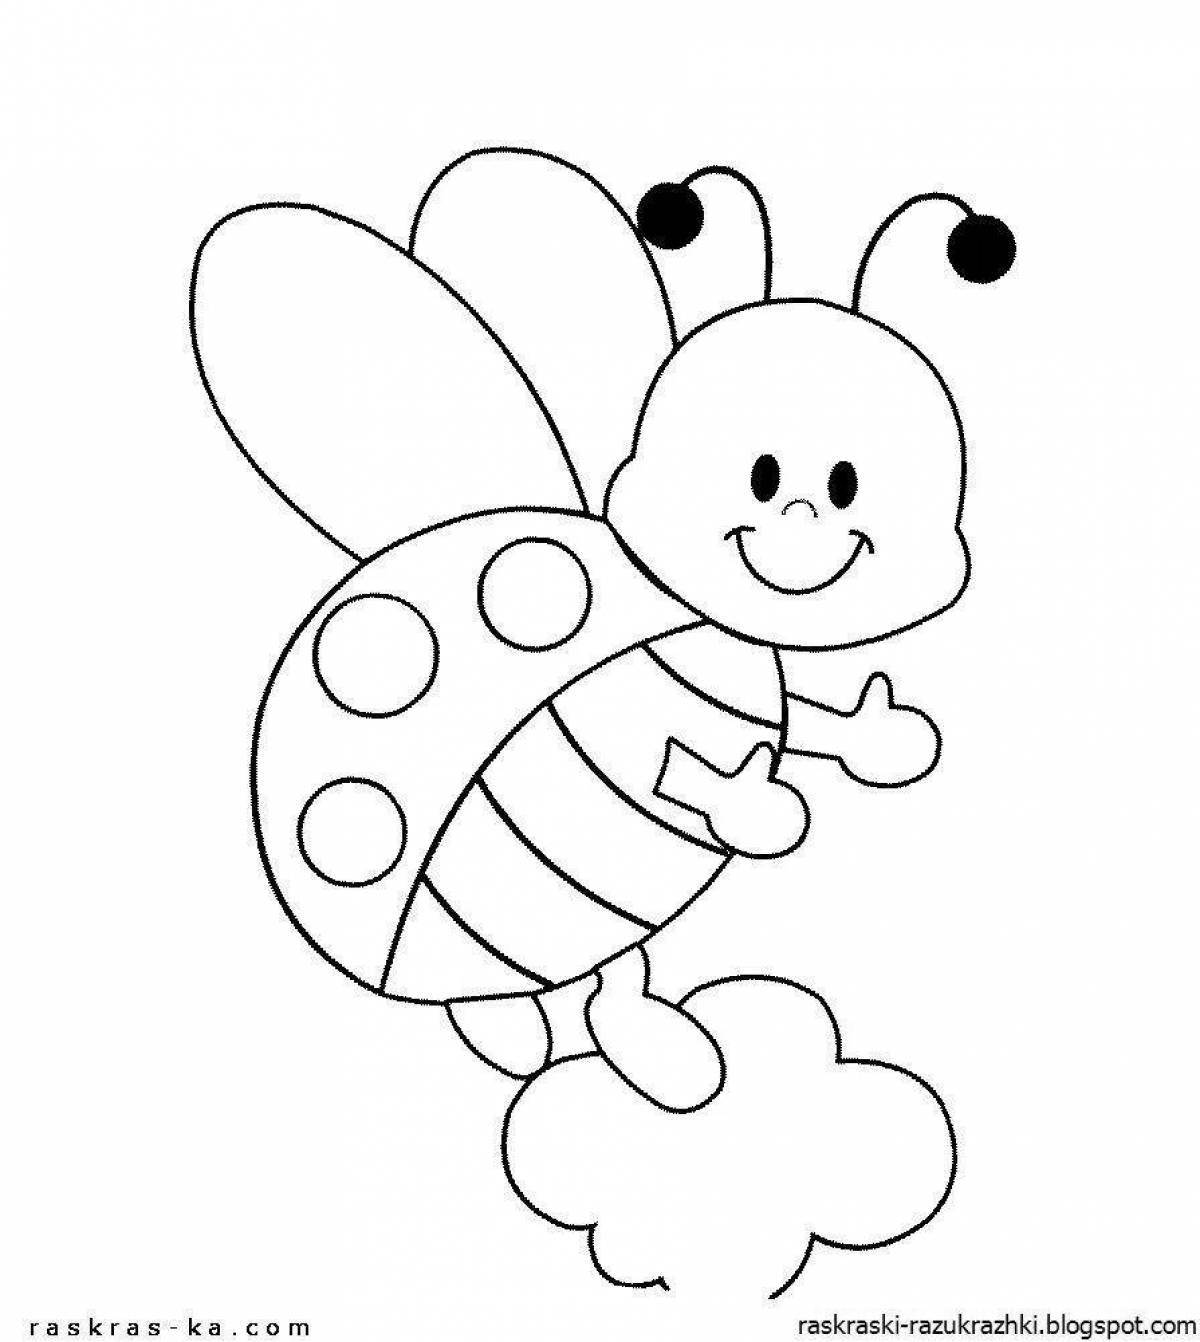 Great ladybug coloring book for kids